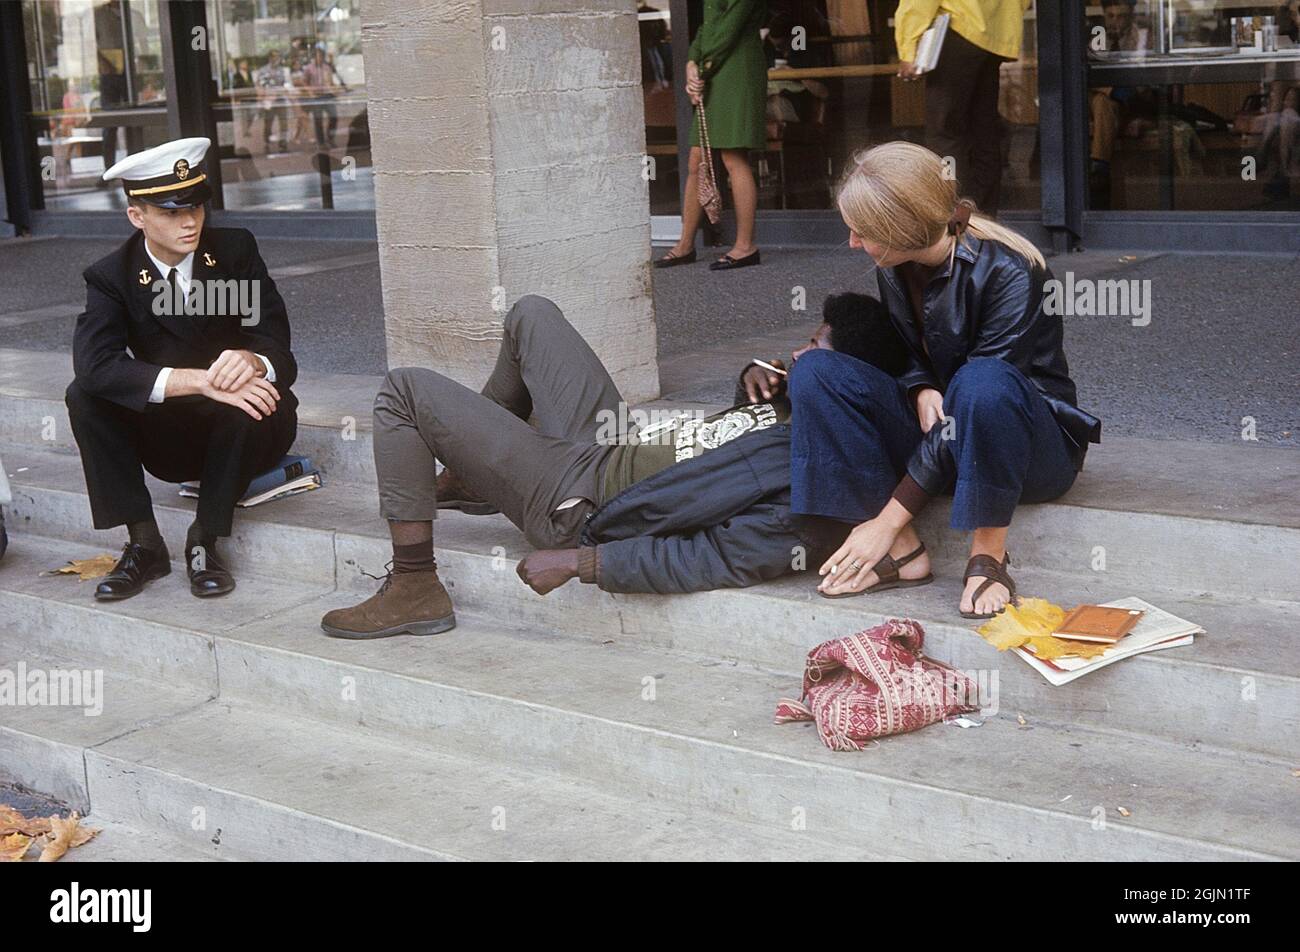 USA december 1968. Students at University of California Berkeley in typical 1968 clothes having a conversation with a young naval officer. Kodachrome slide original.   Credit Roland Palm ref 6-1-16 Stock Photo